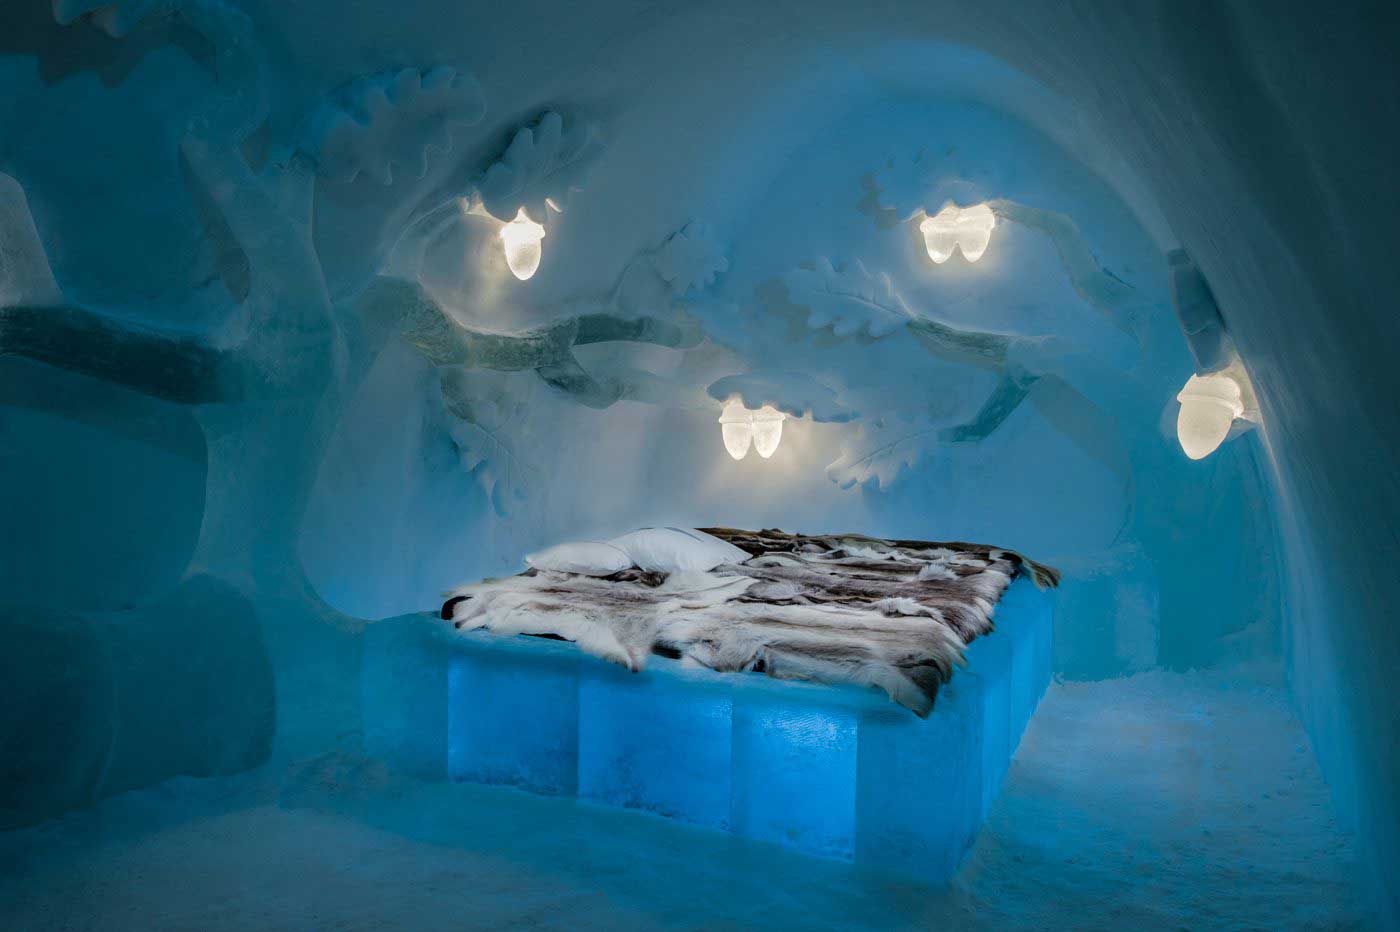 This year’s Icehotel has forest, ocean, and sweet shop-themed rooms